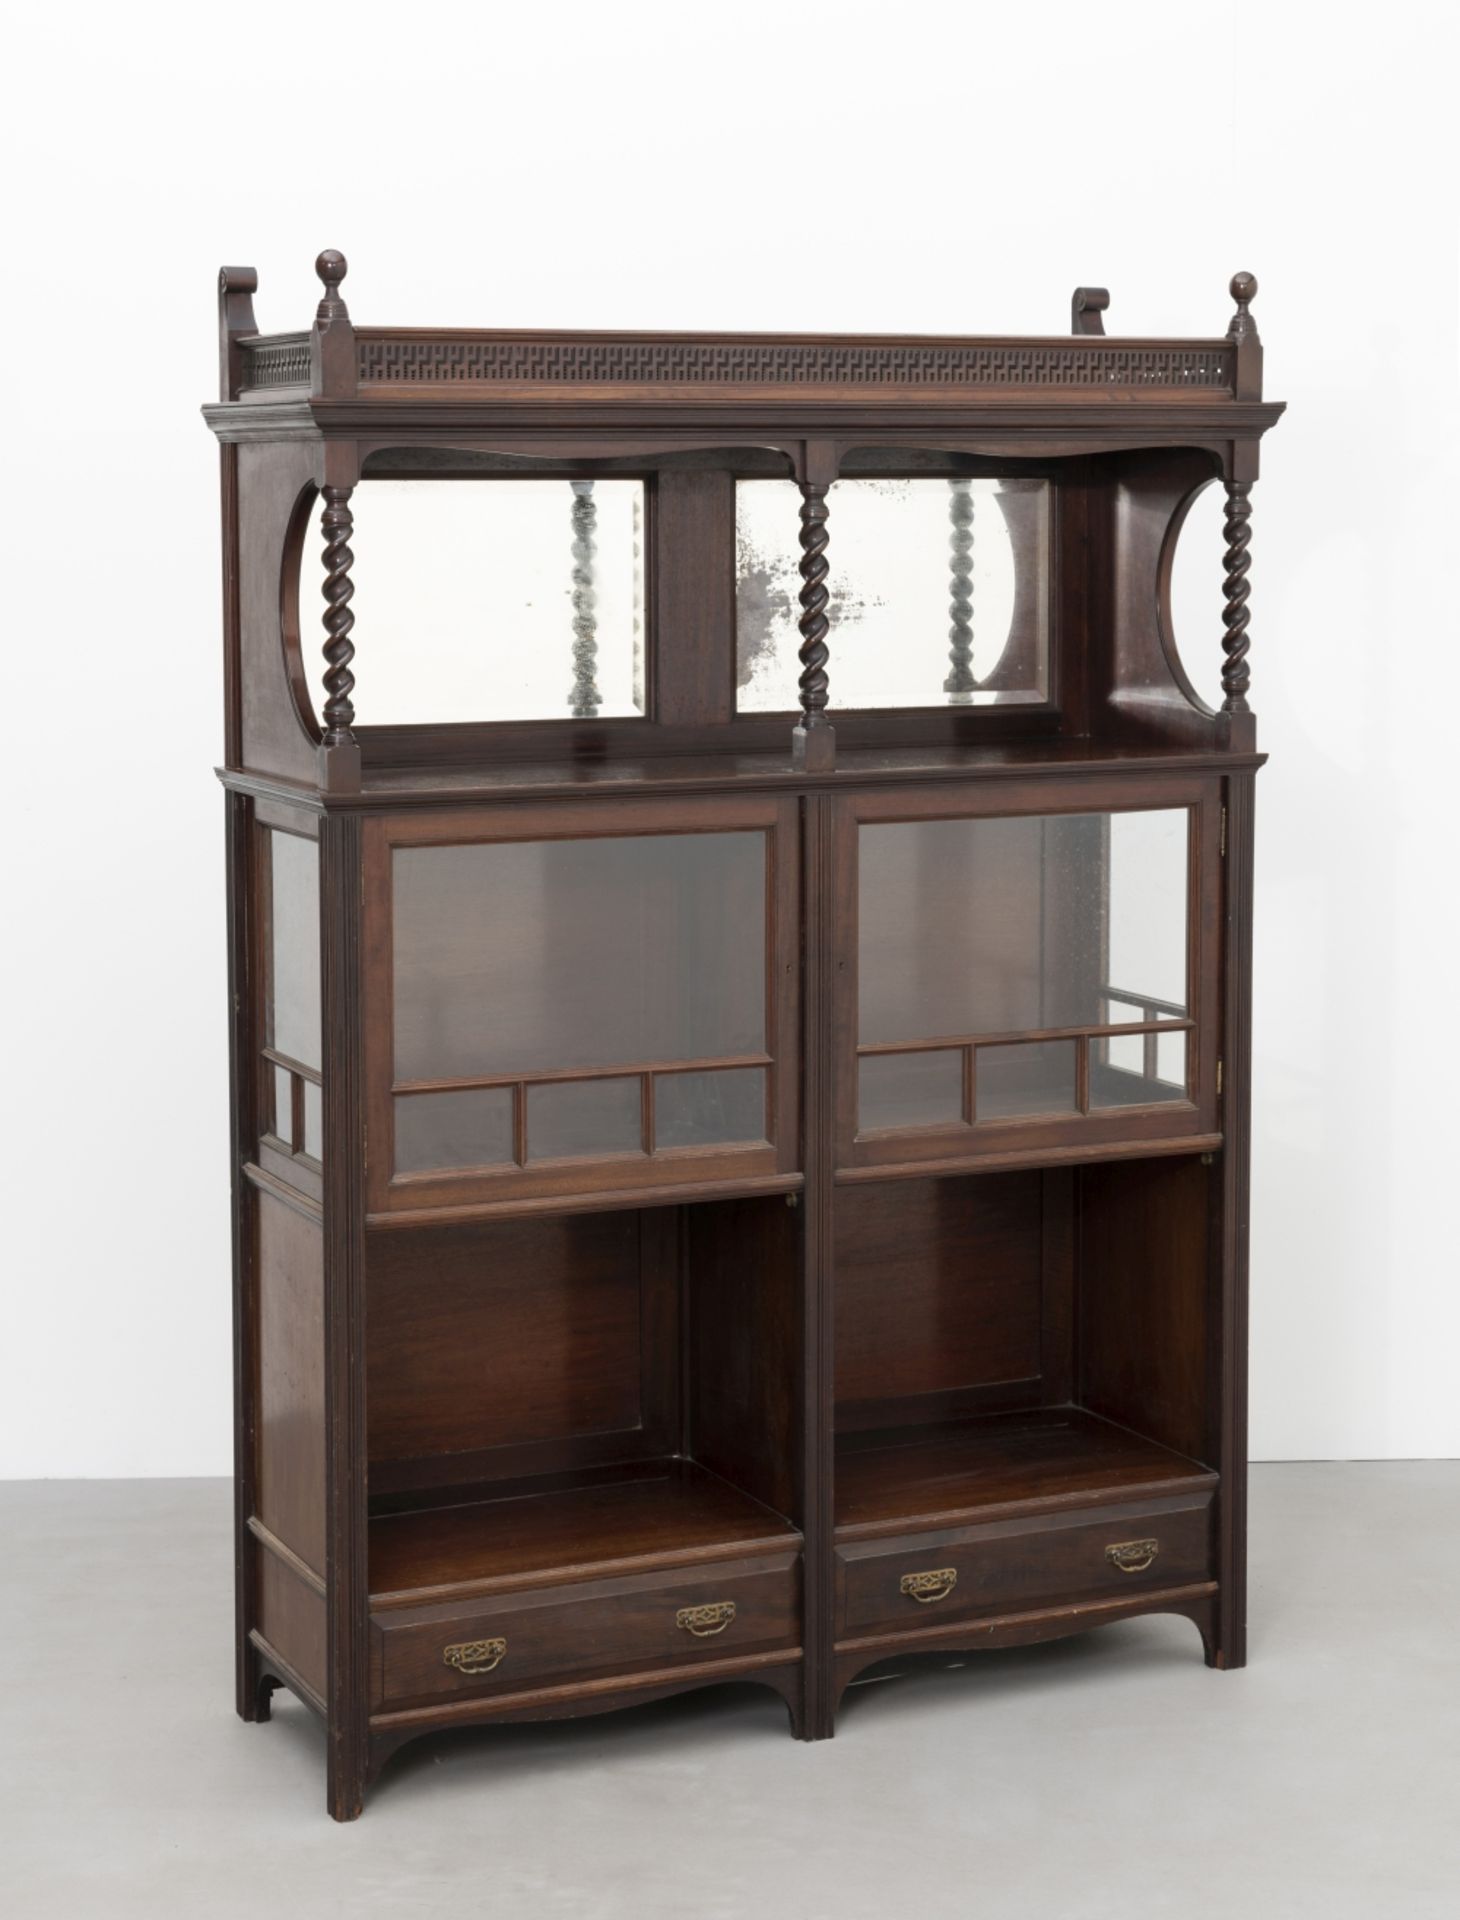 Attributed to Philip Webb for Morris & Co. Collector's cabinet, circa 1880